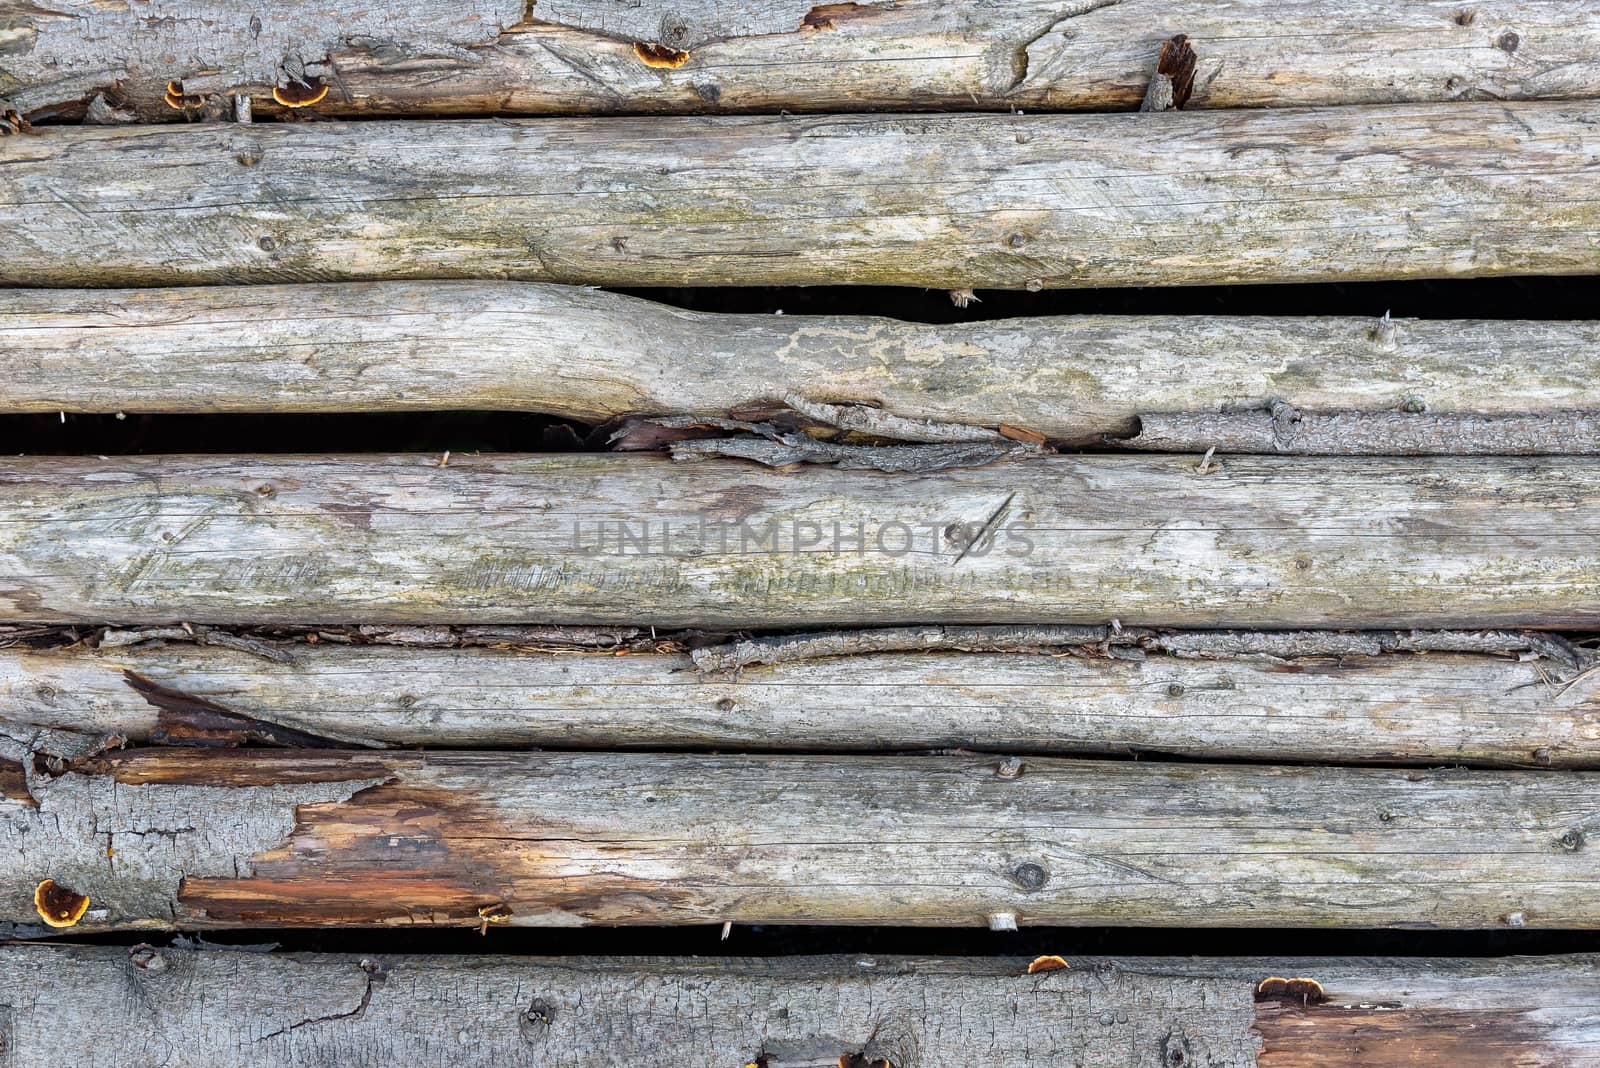 Wooden texture made of logs by mkos83